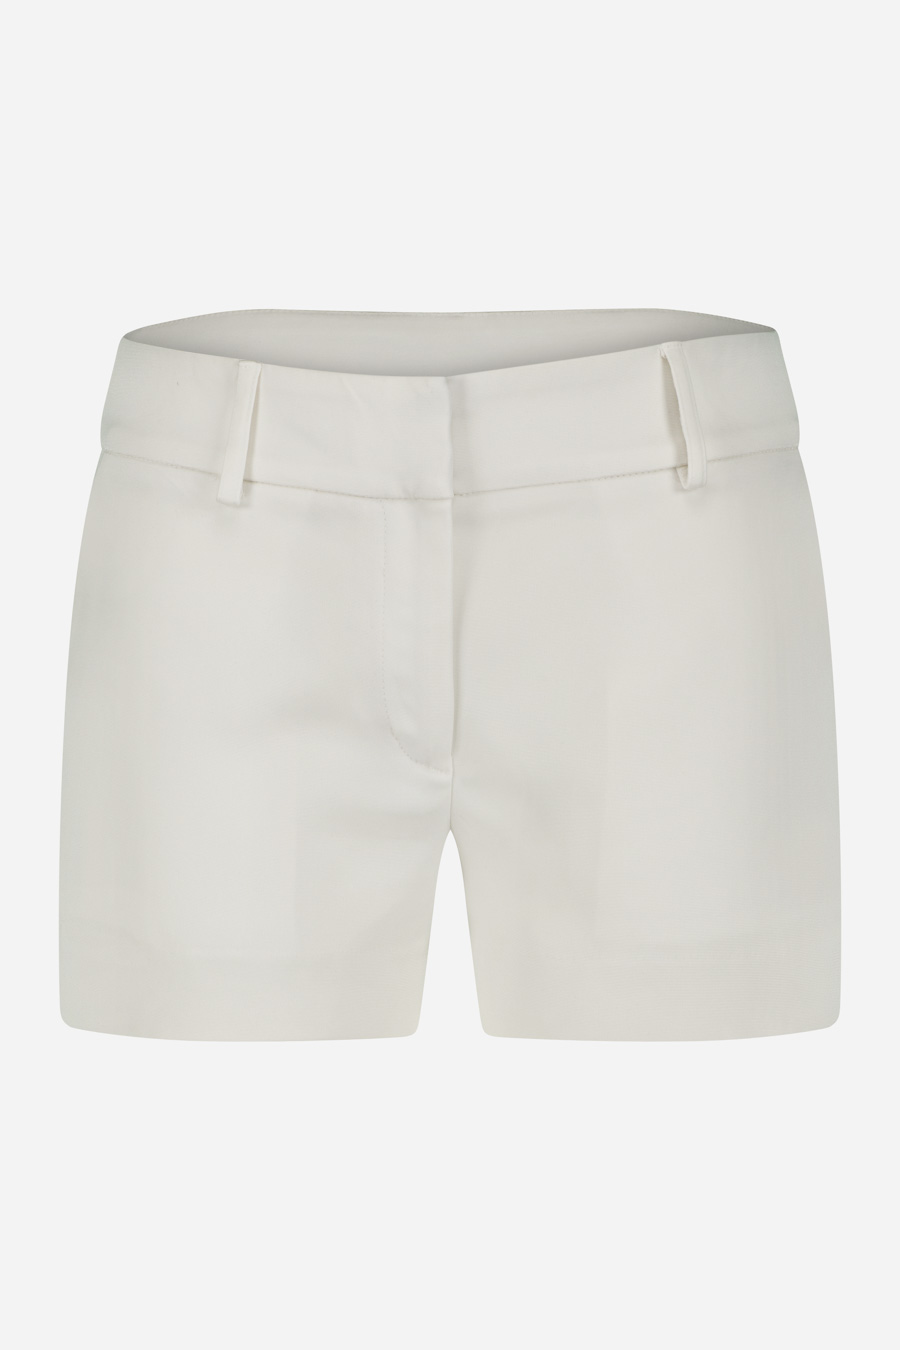 White shorts with side pockets - D2LINE